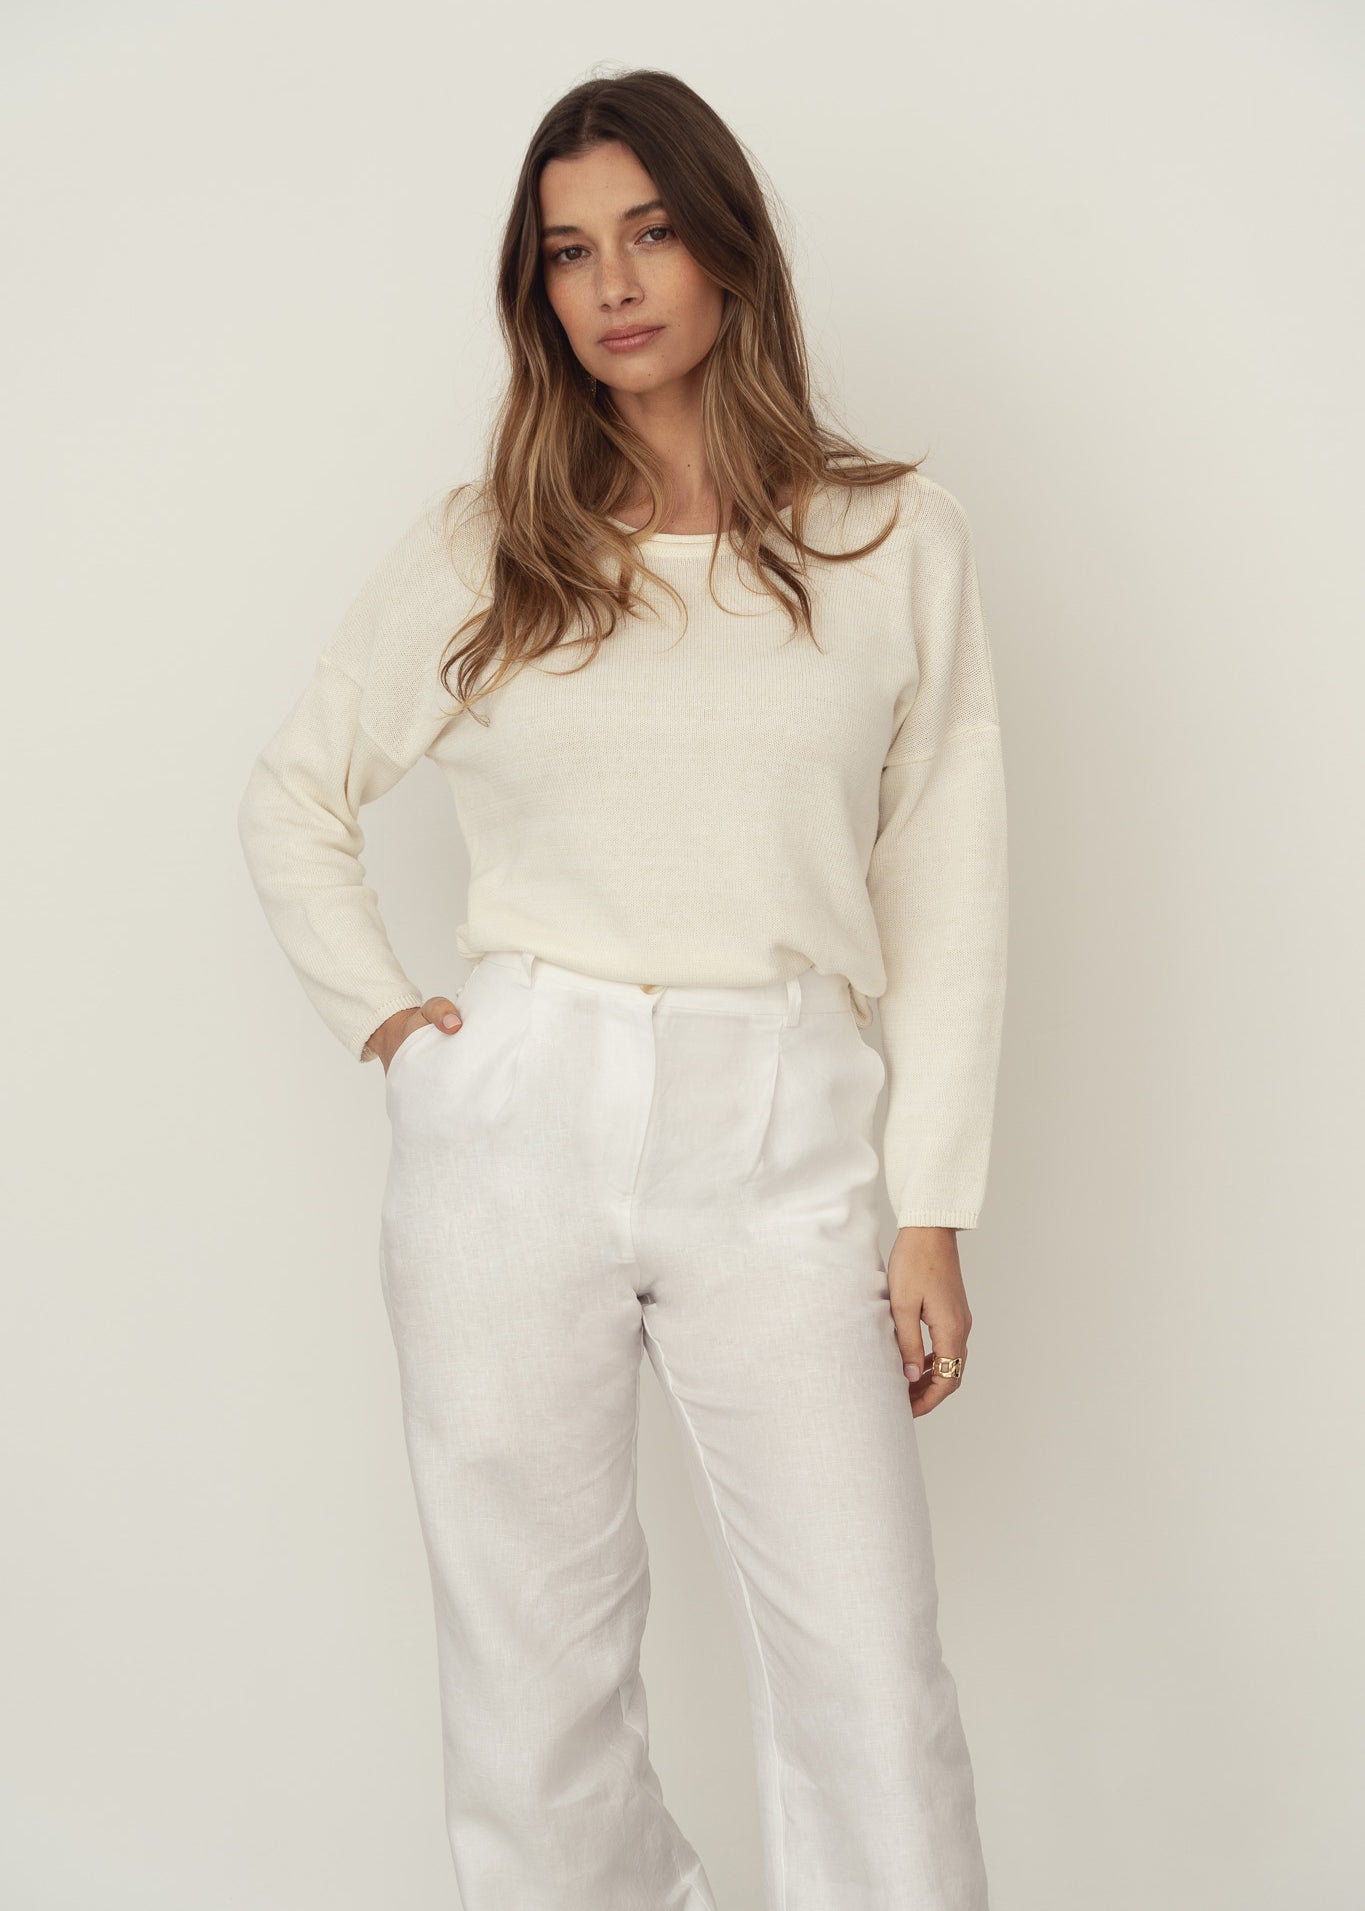 Naz women's sweater in with made with recycled cotton. Features a boat neck and a relaxed fit. Made ethically in Portugal. 